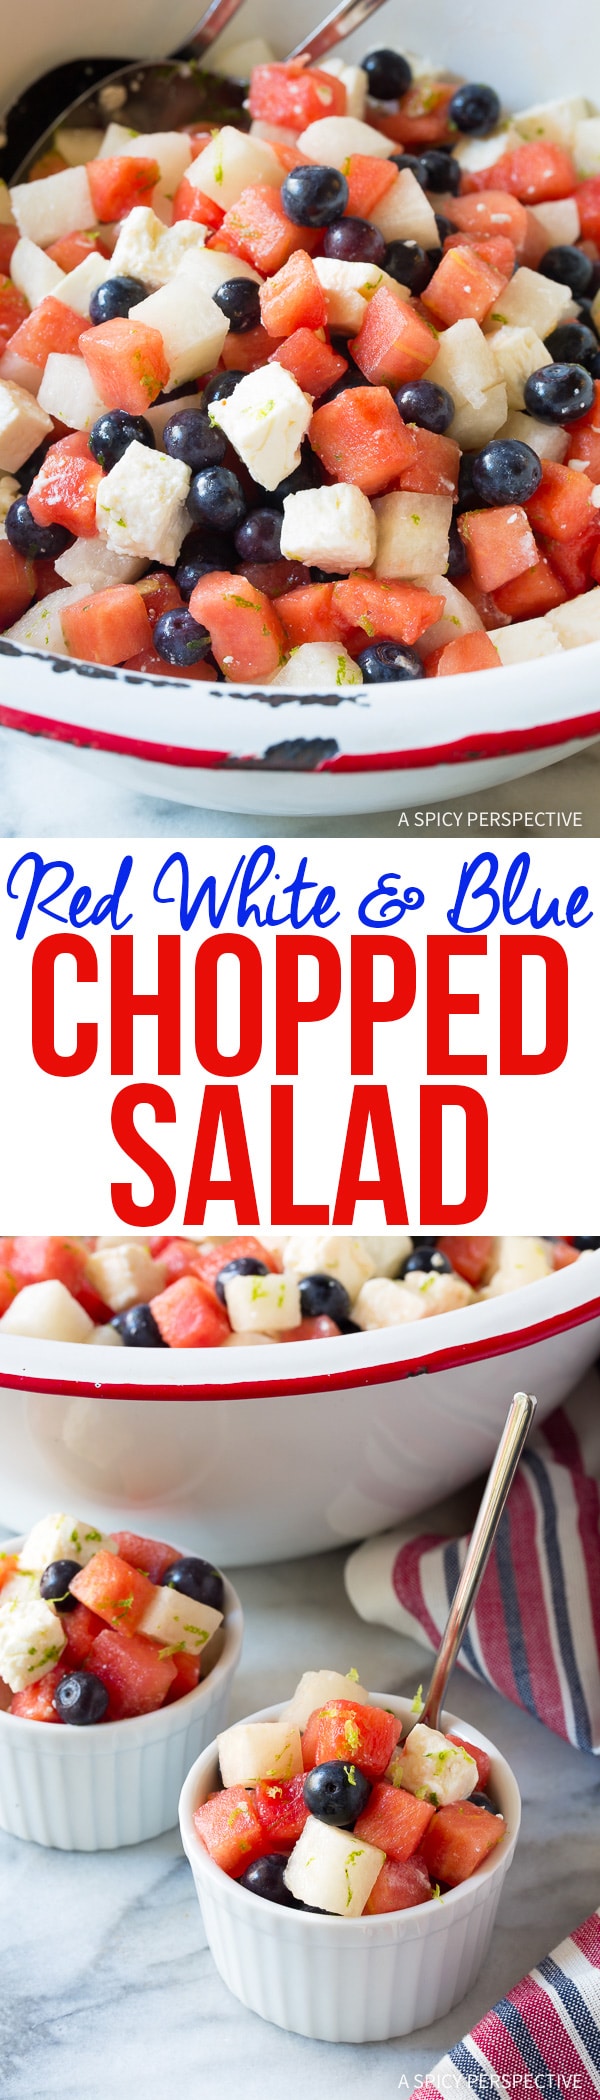 Festive Red White and Blue Chopped Salad Recipe for Independence Day! #July4th